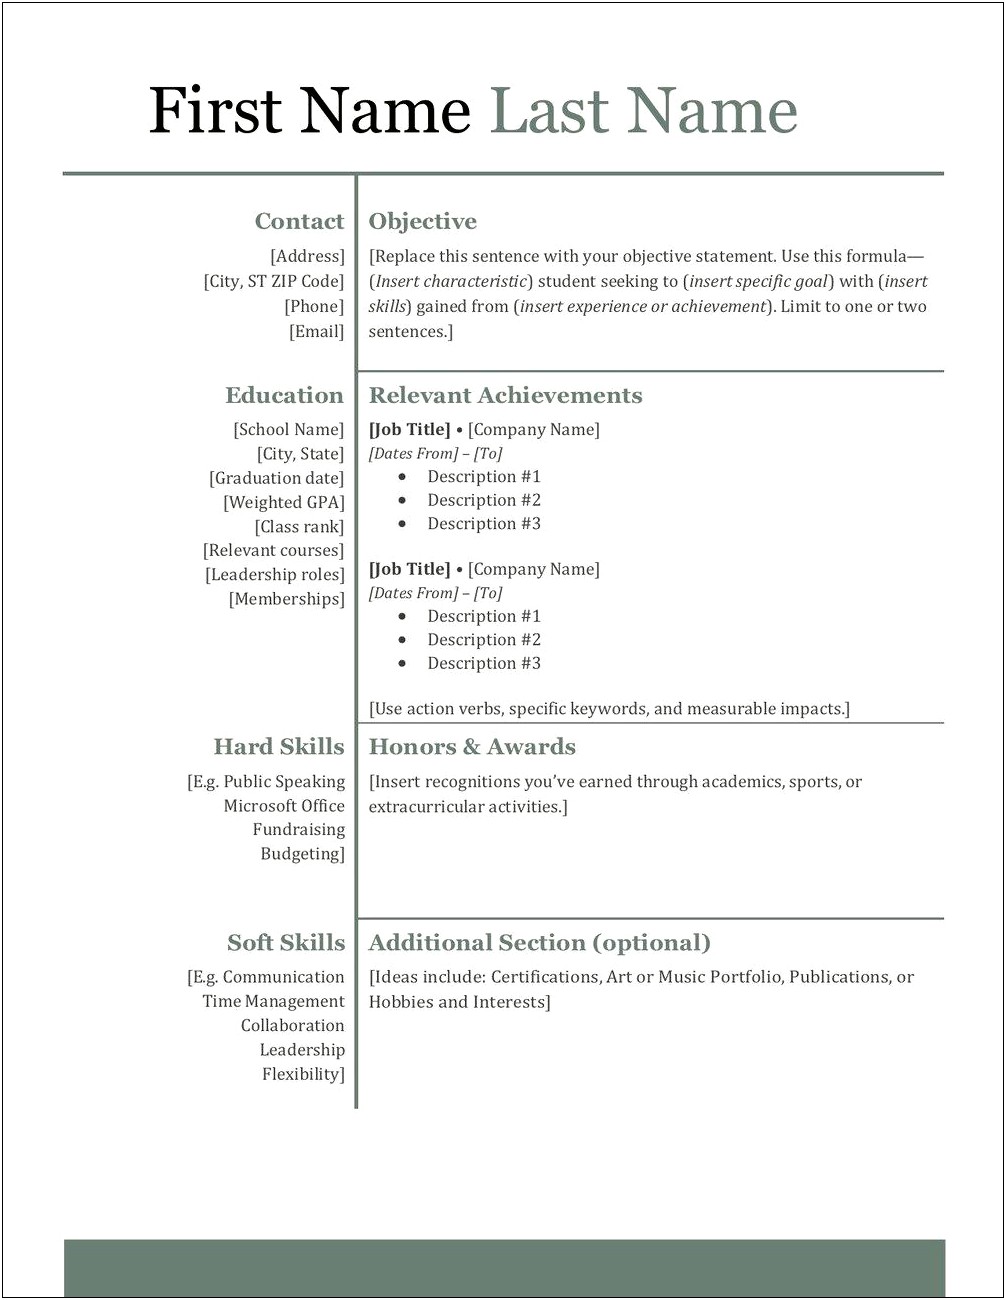 Us Navy Experience Description For Resume